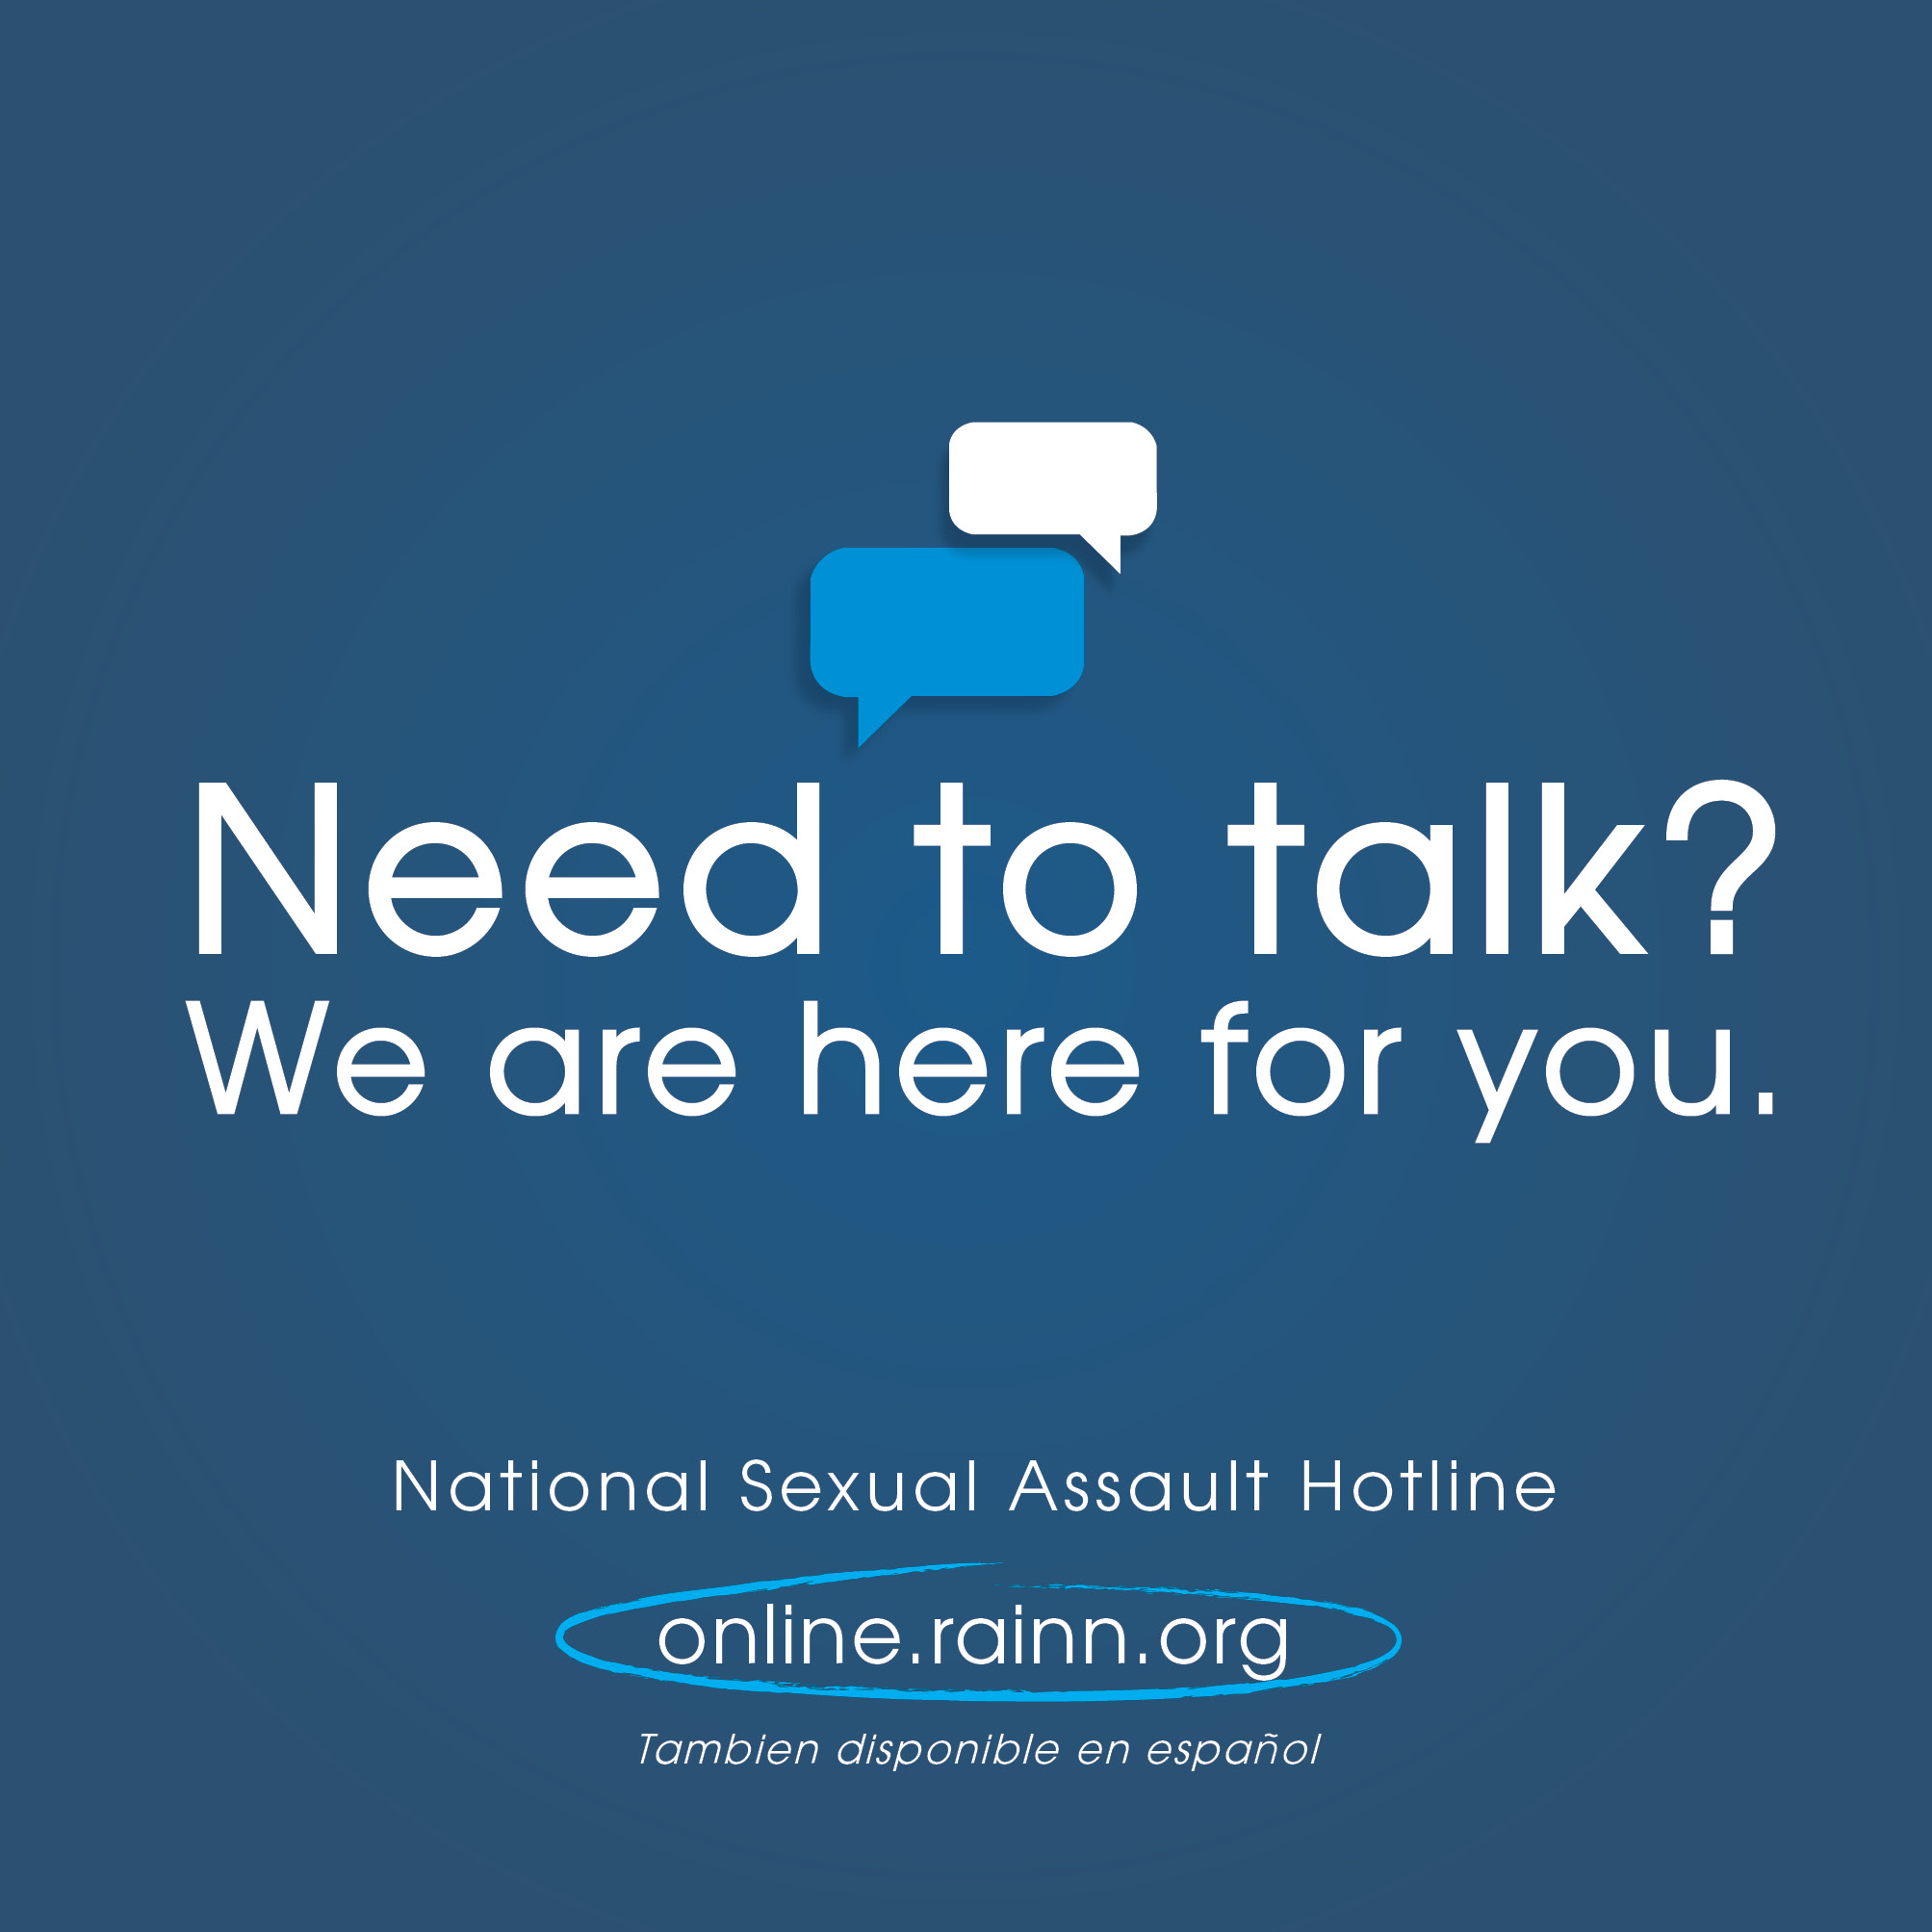 graphic from rainn.org for a national sexual assault hotline, with a web address of online.rainn.org